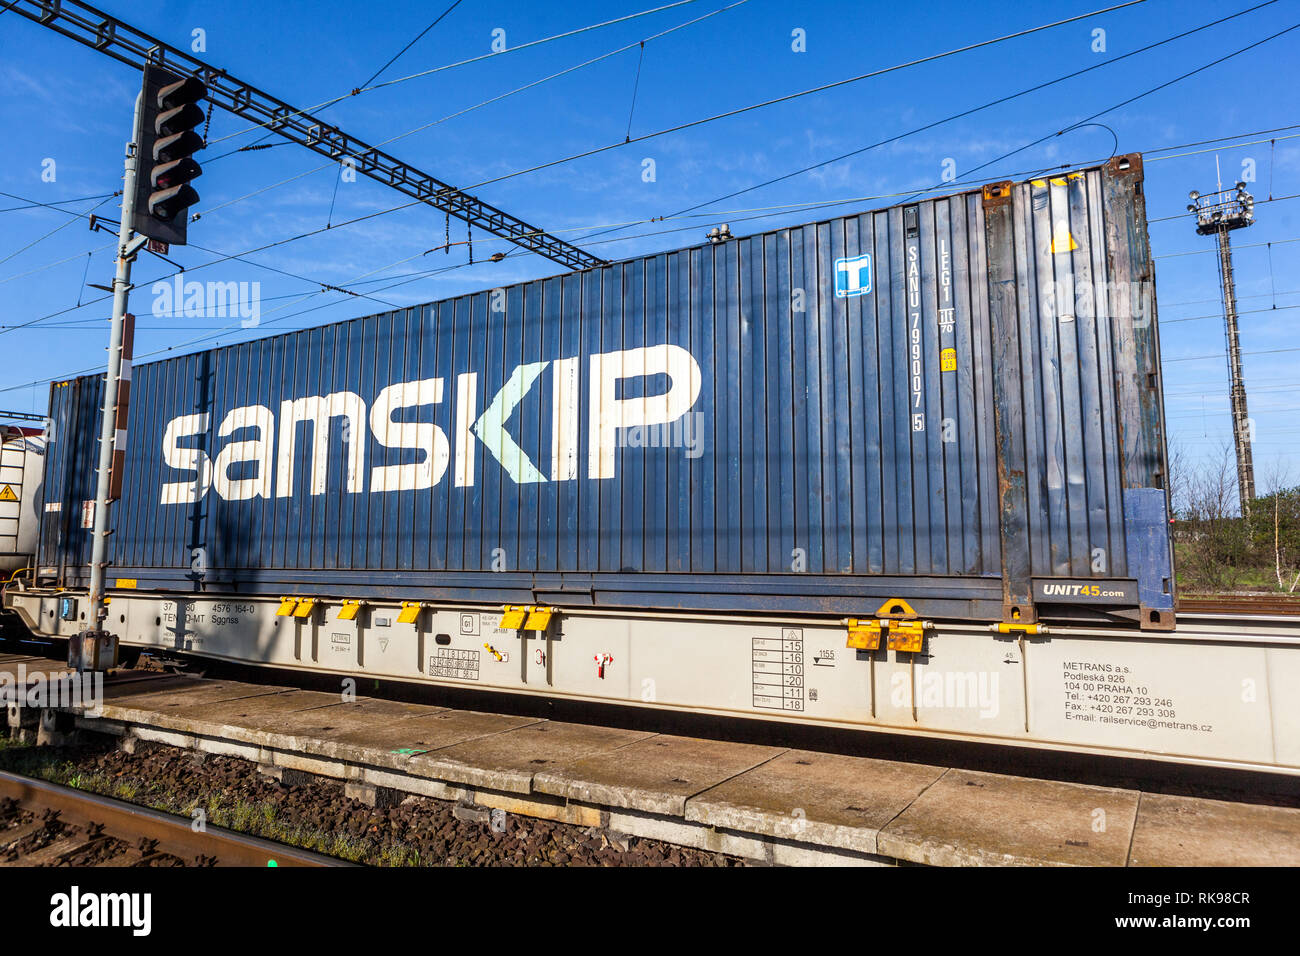 Shipping container Samskip transported by rail Stock Photo